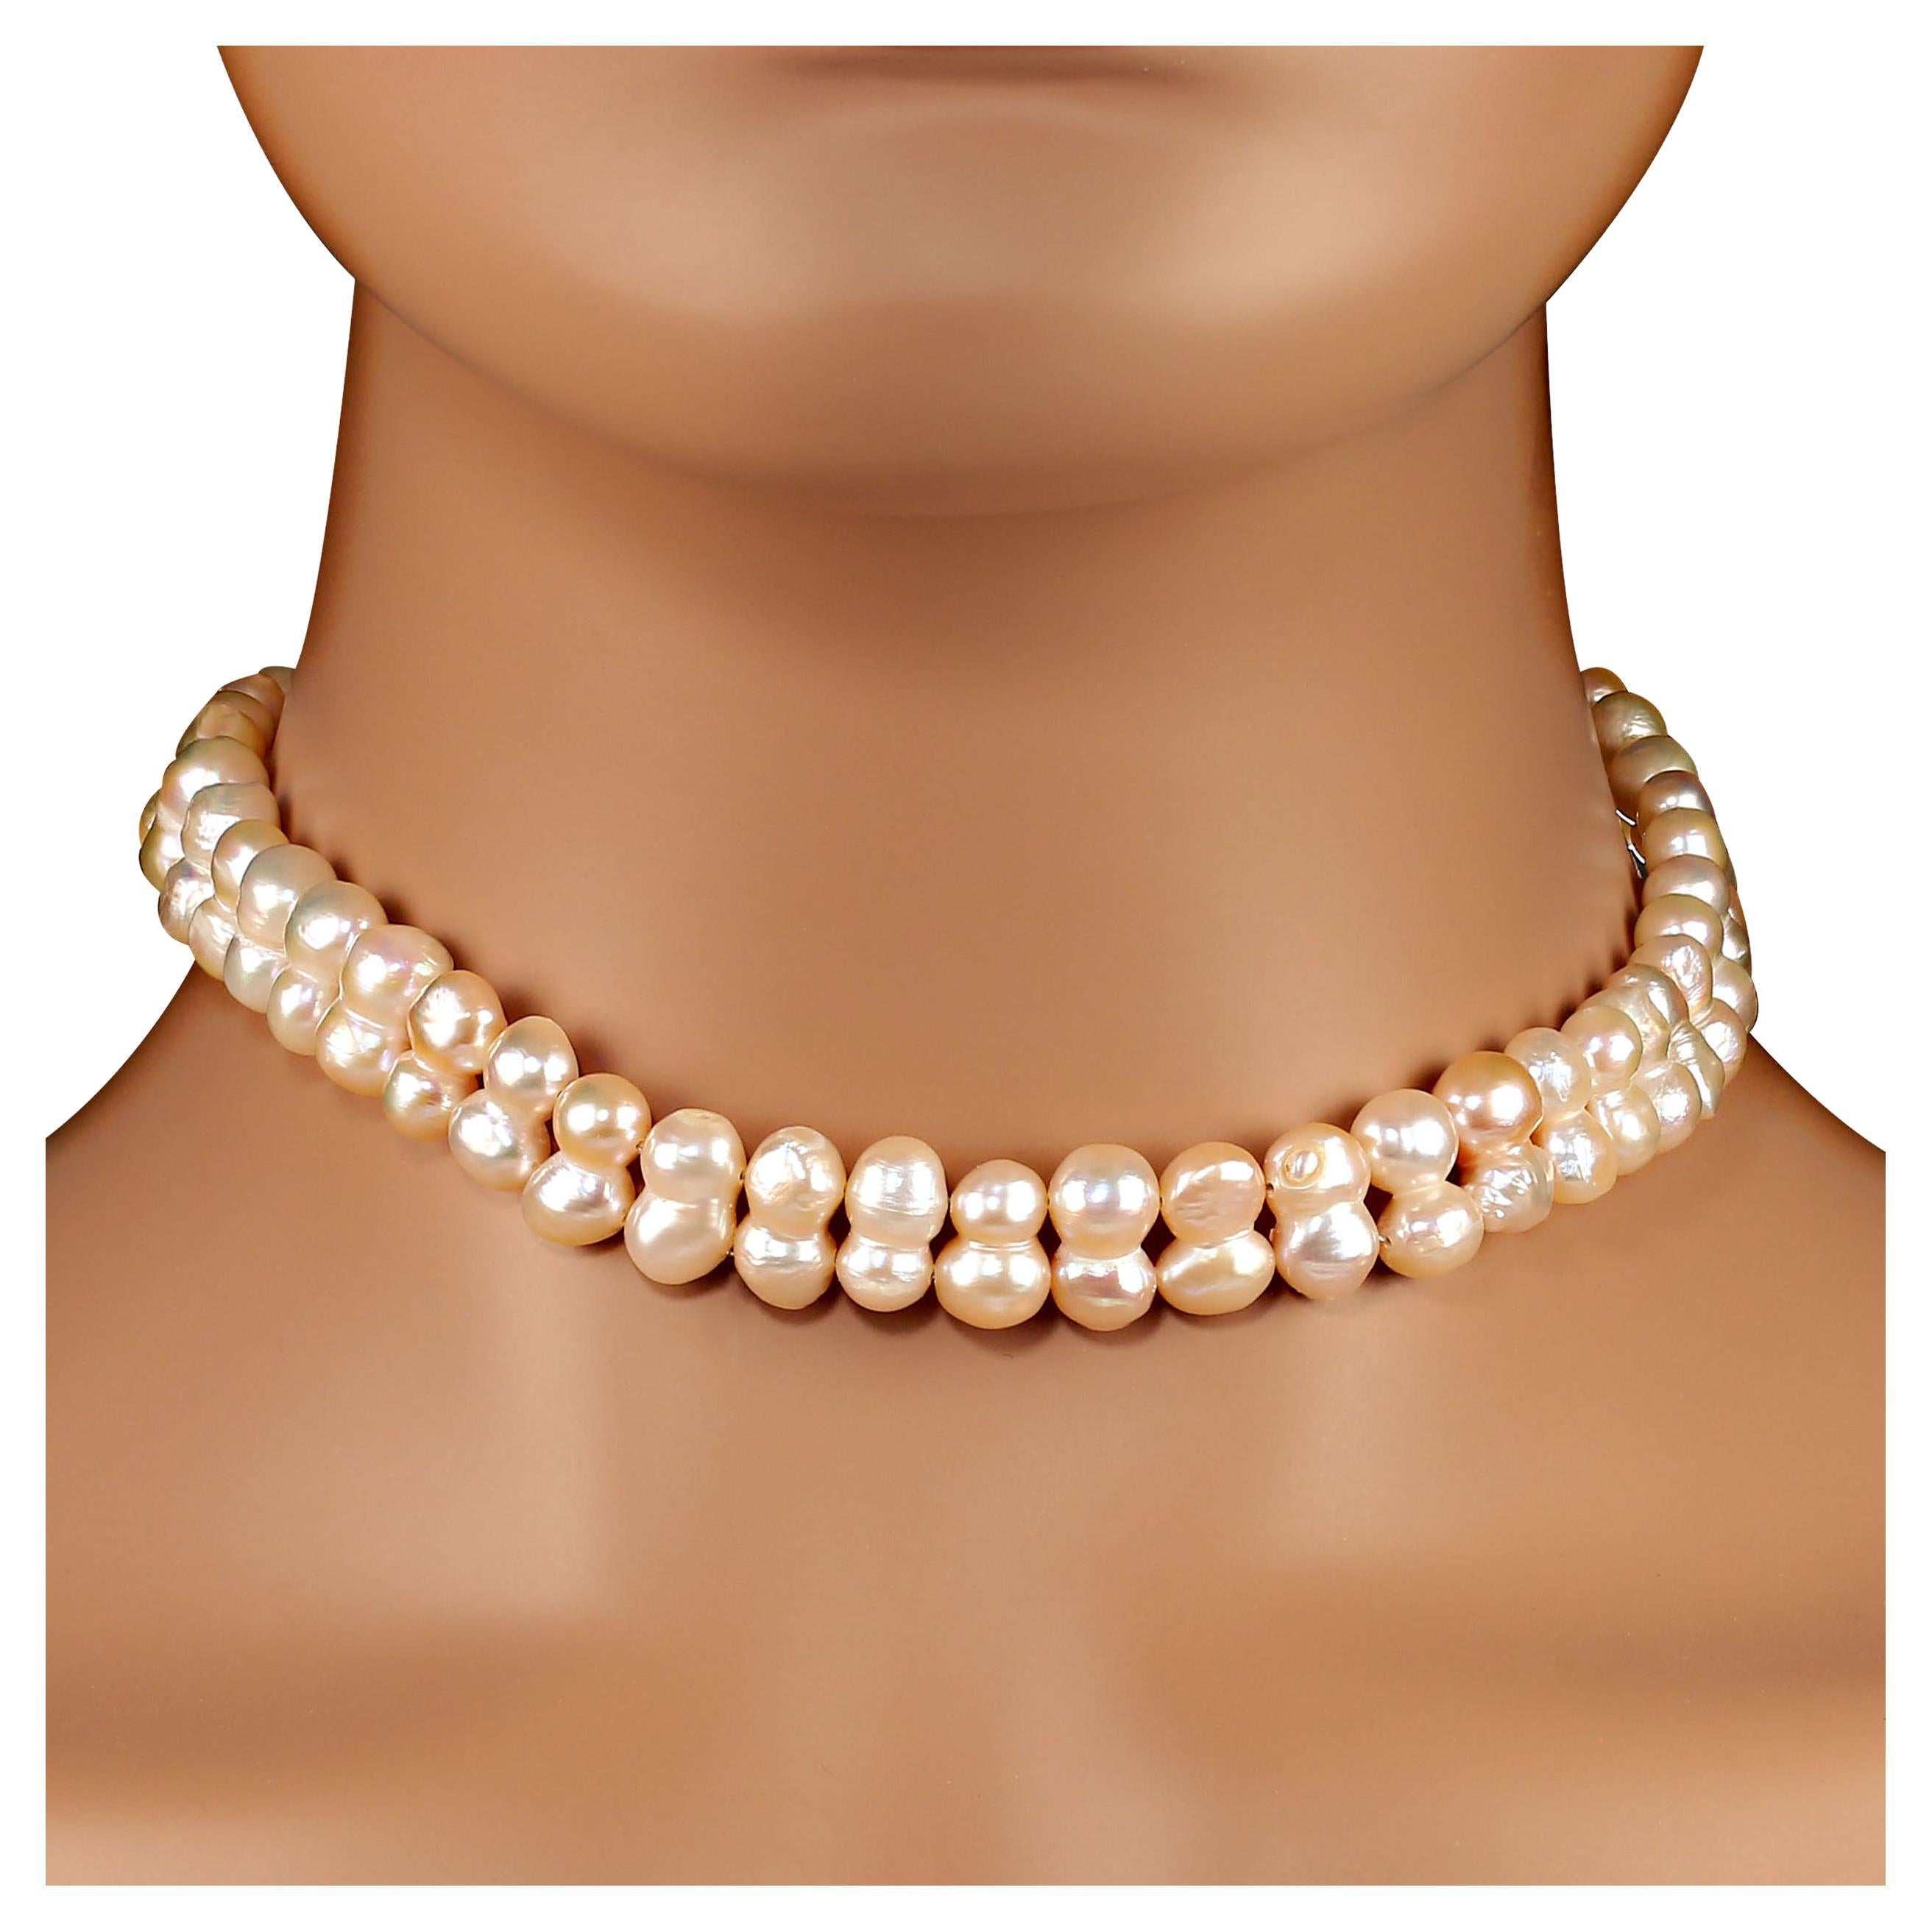 AJD 15.5 Inch Choker length Pearls double strand   Perfect gift!